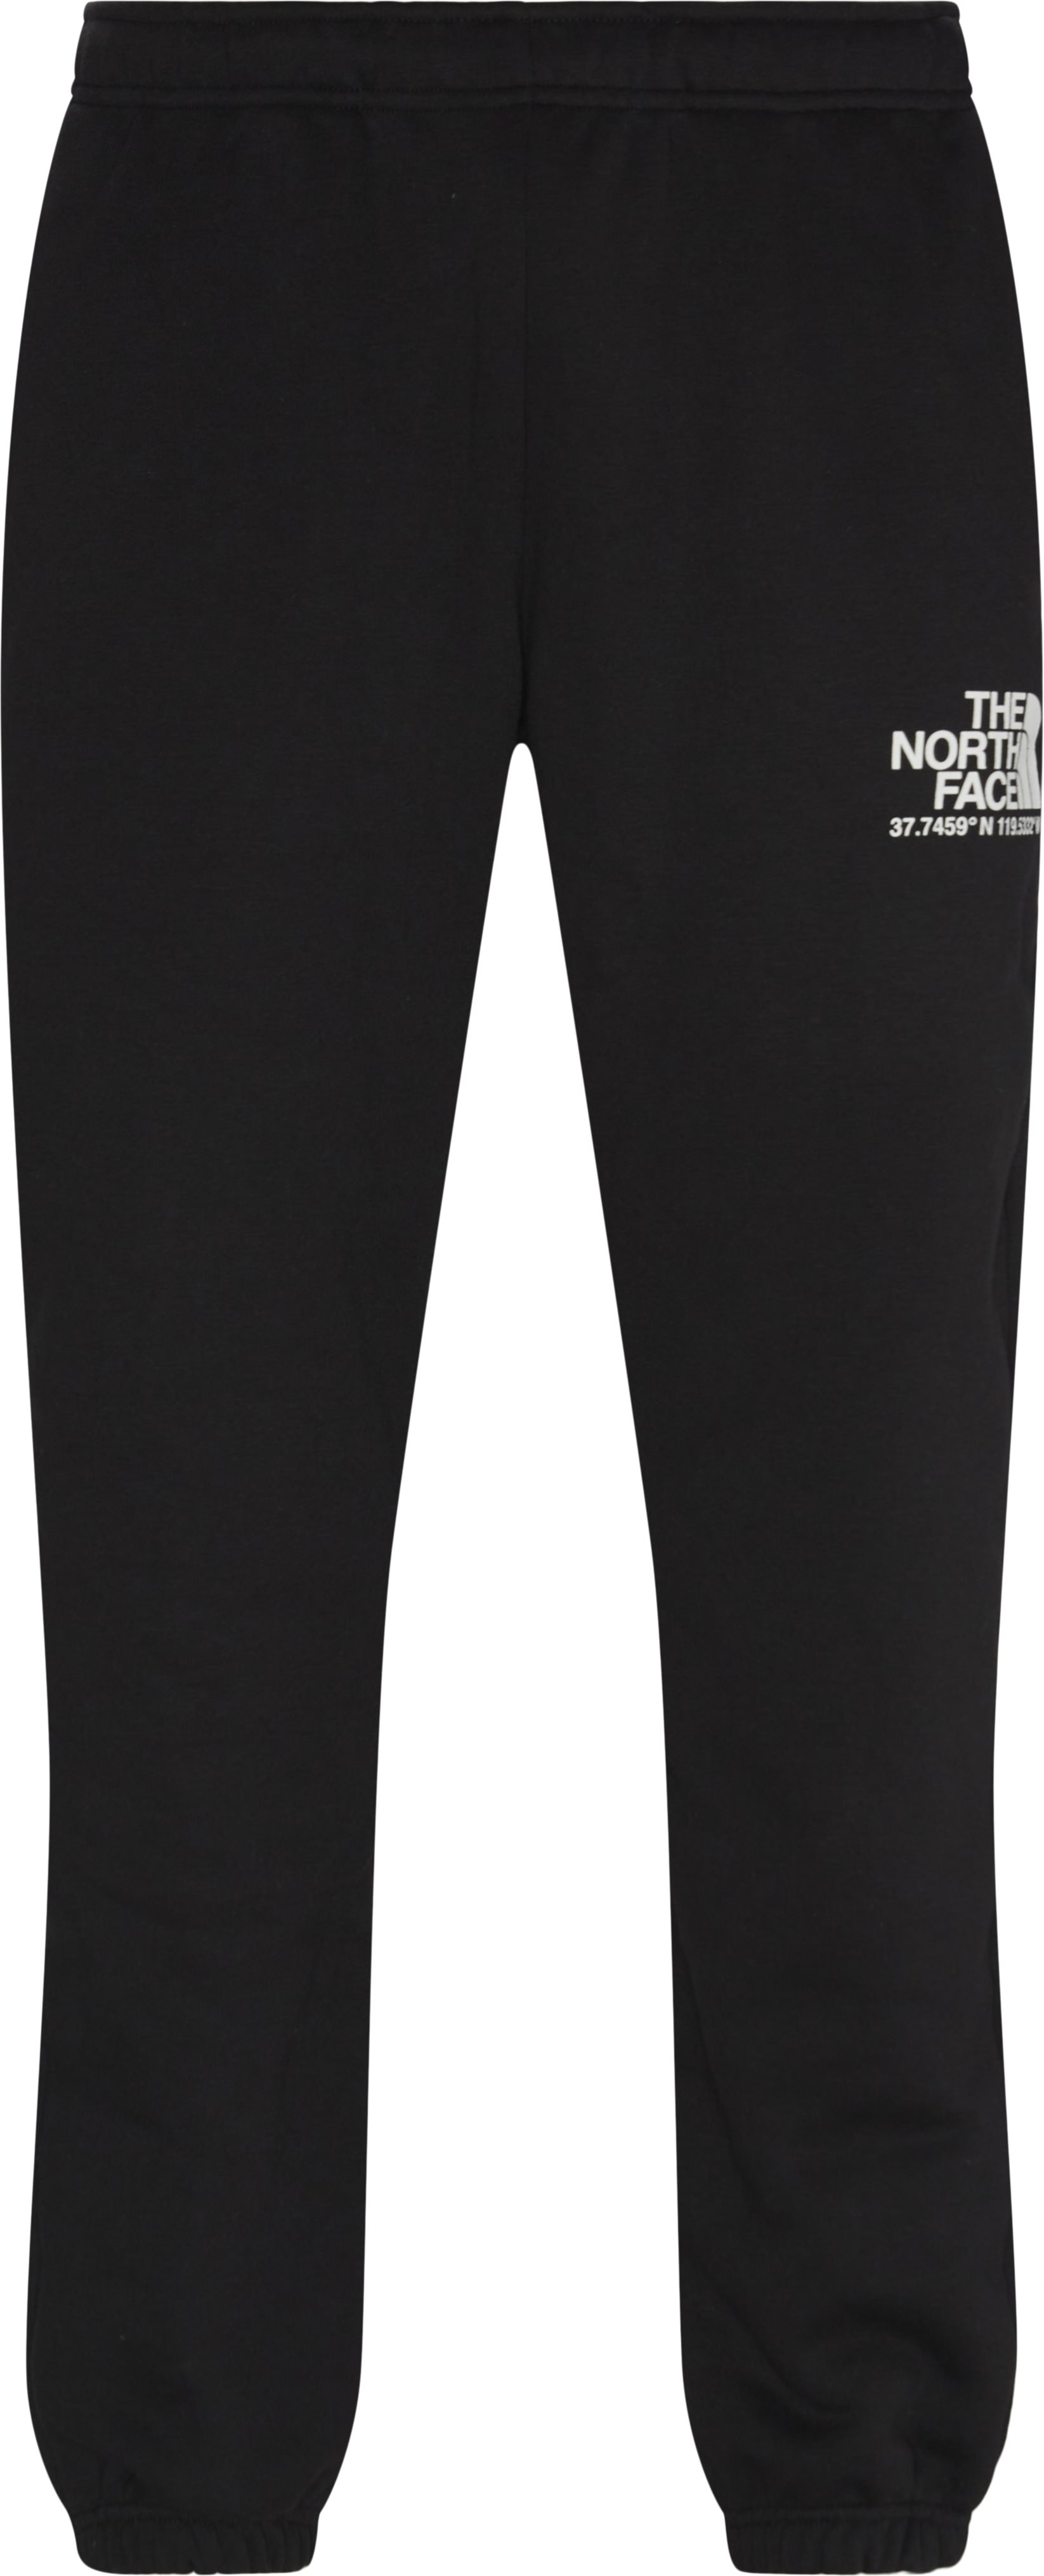 The North Face Bukser COORDINATES PANT NF0A55UT Sort